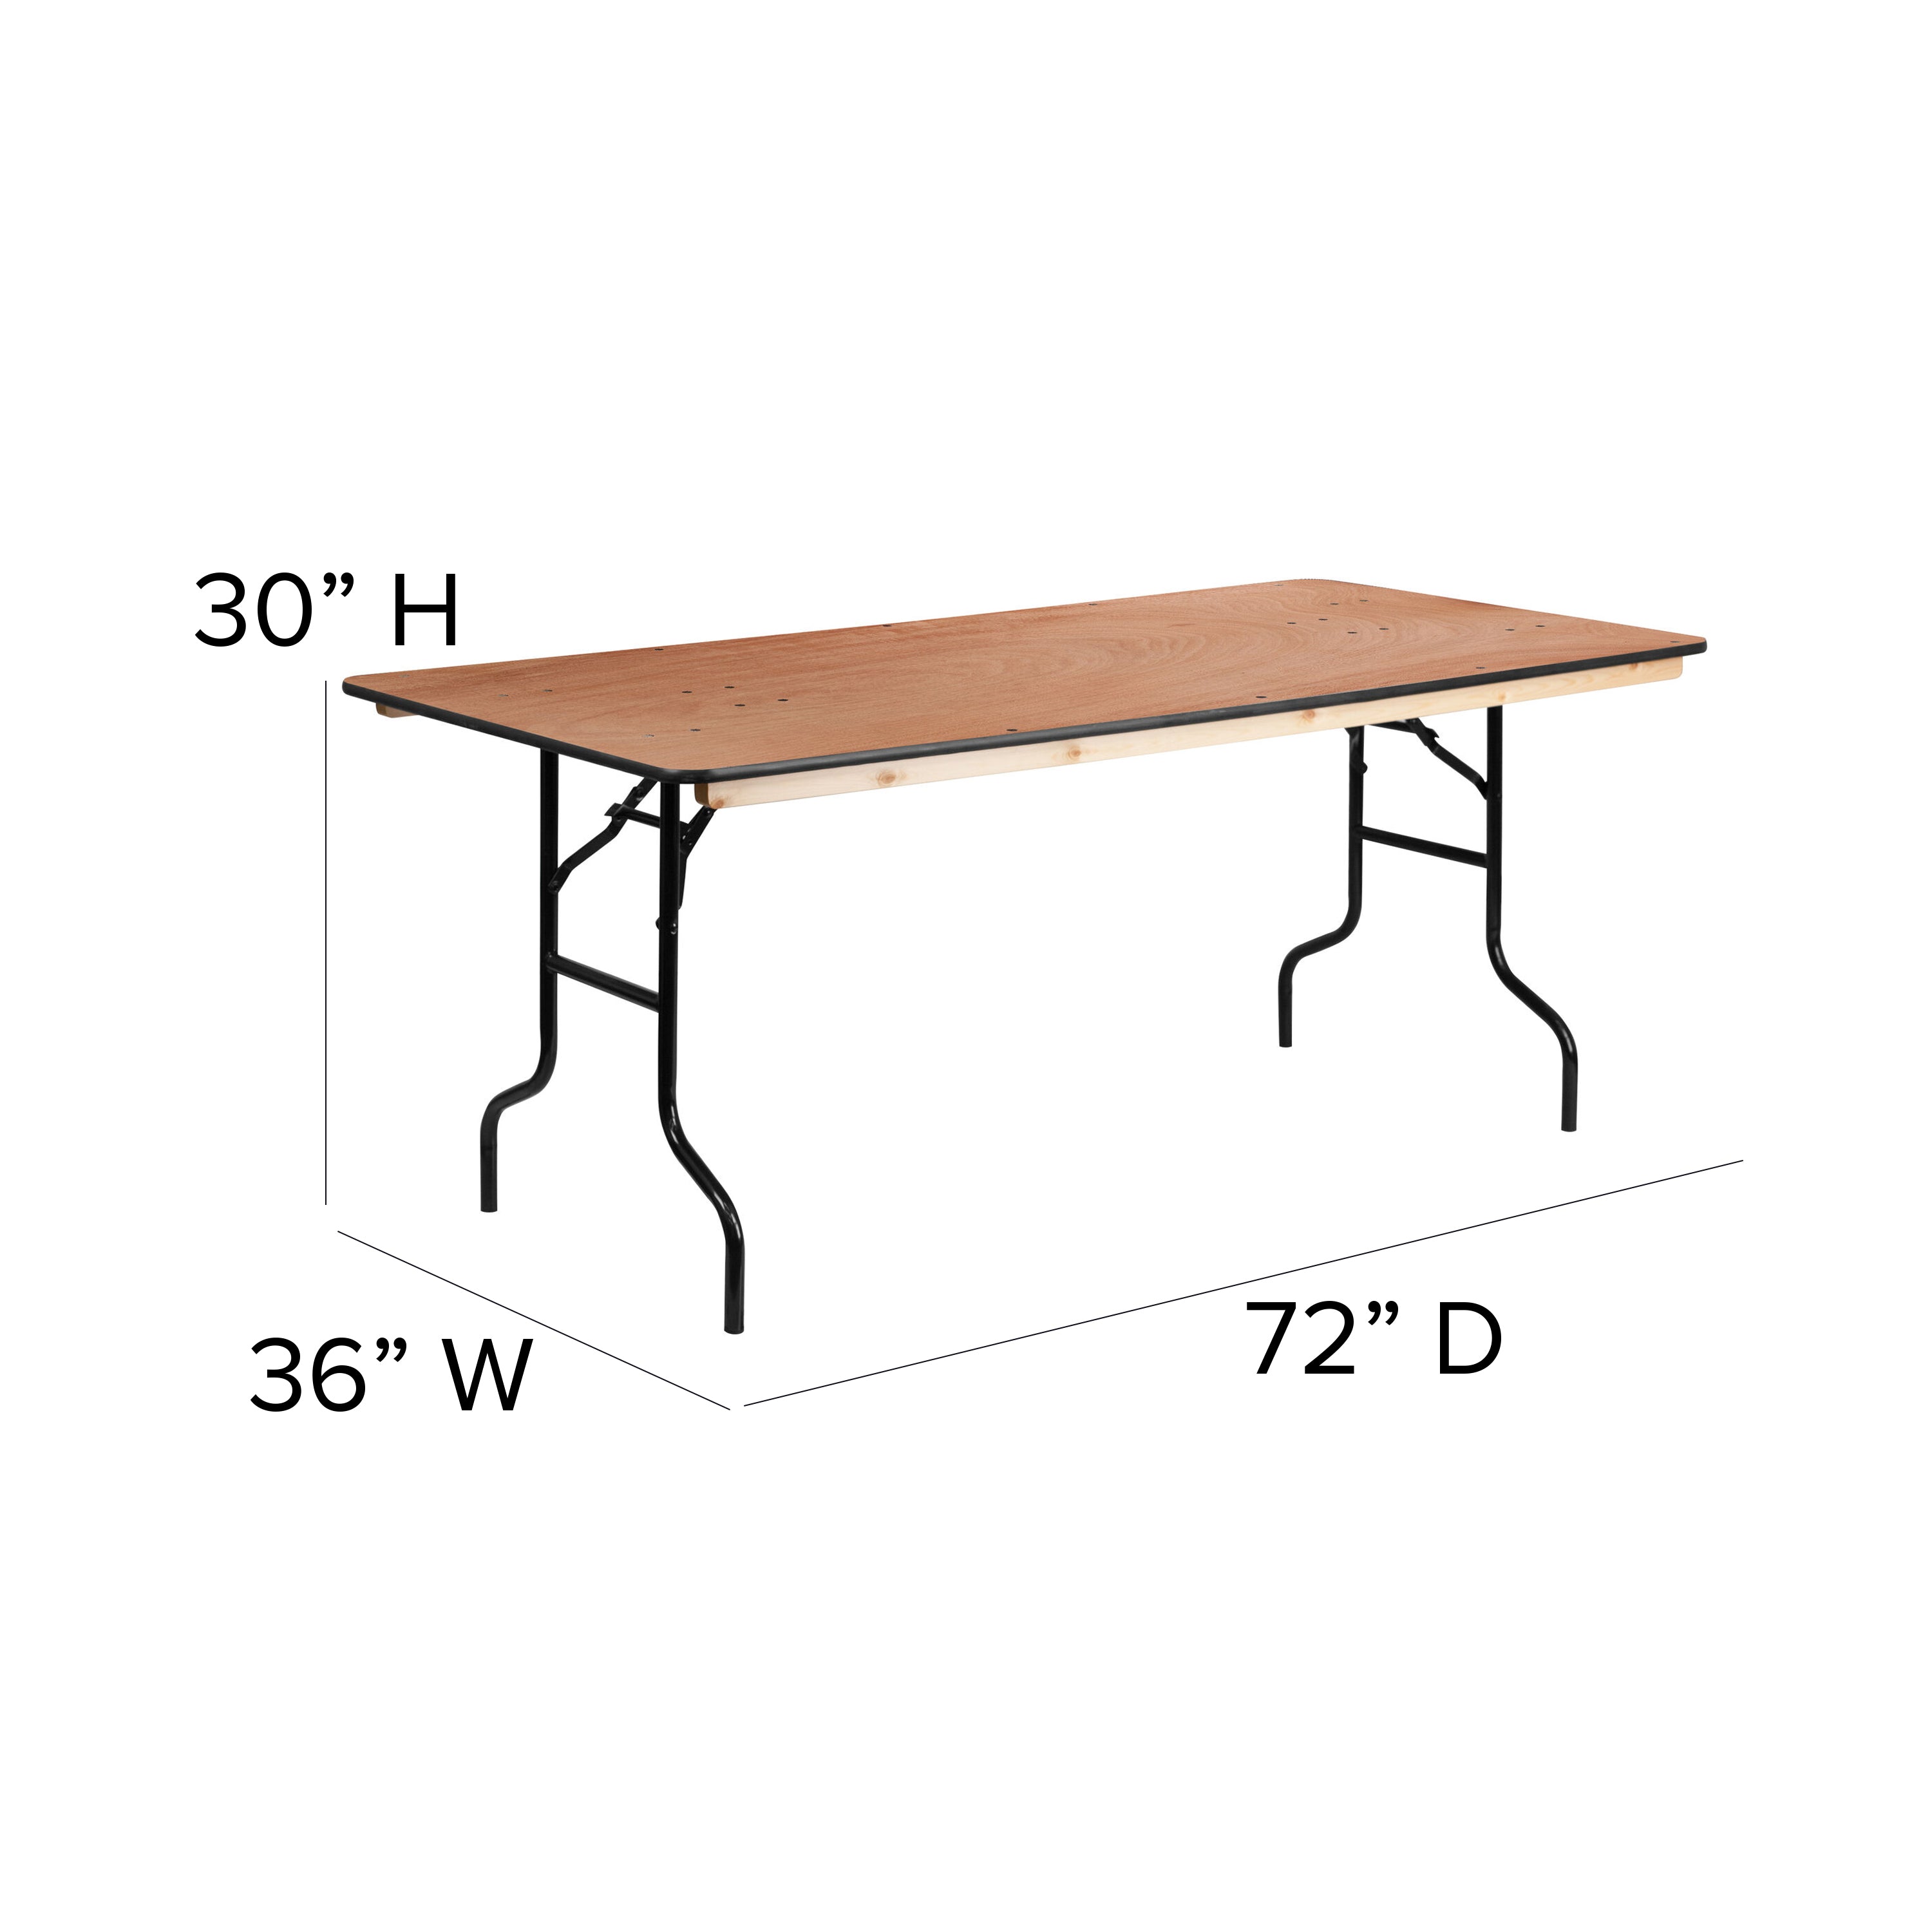 6-Foot Rectangular Wood Folding Banquet Table with Clear Coated Finished Top-Rectangular Folding Table-Flash Furniture-Wall2Wall Furnishings